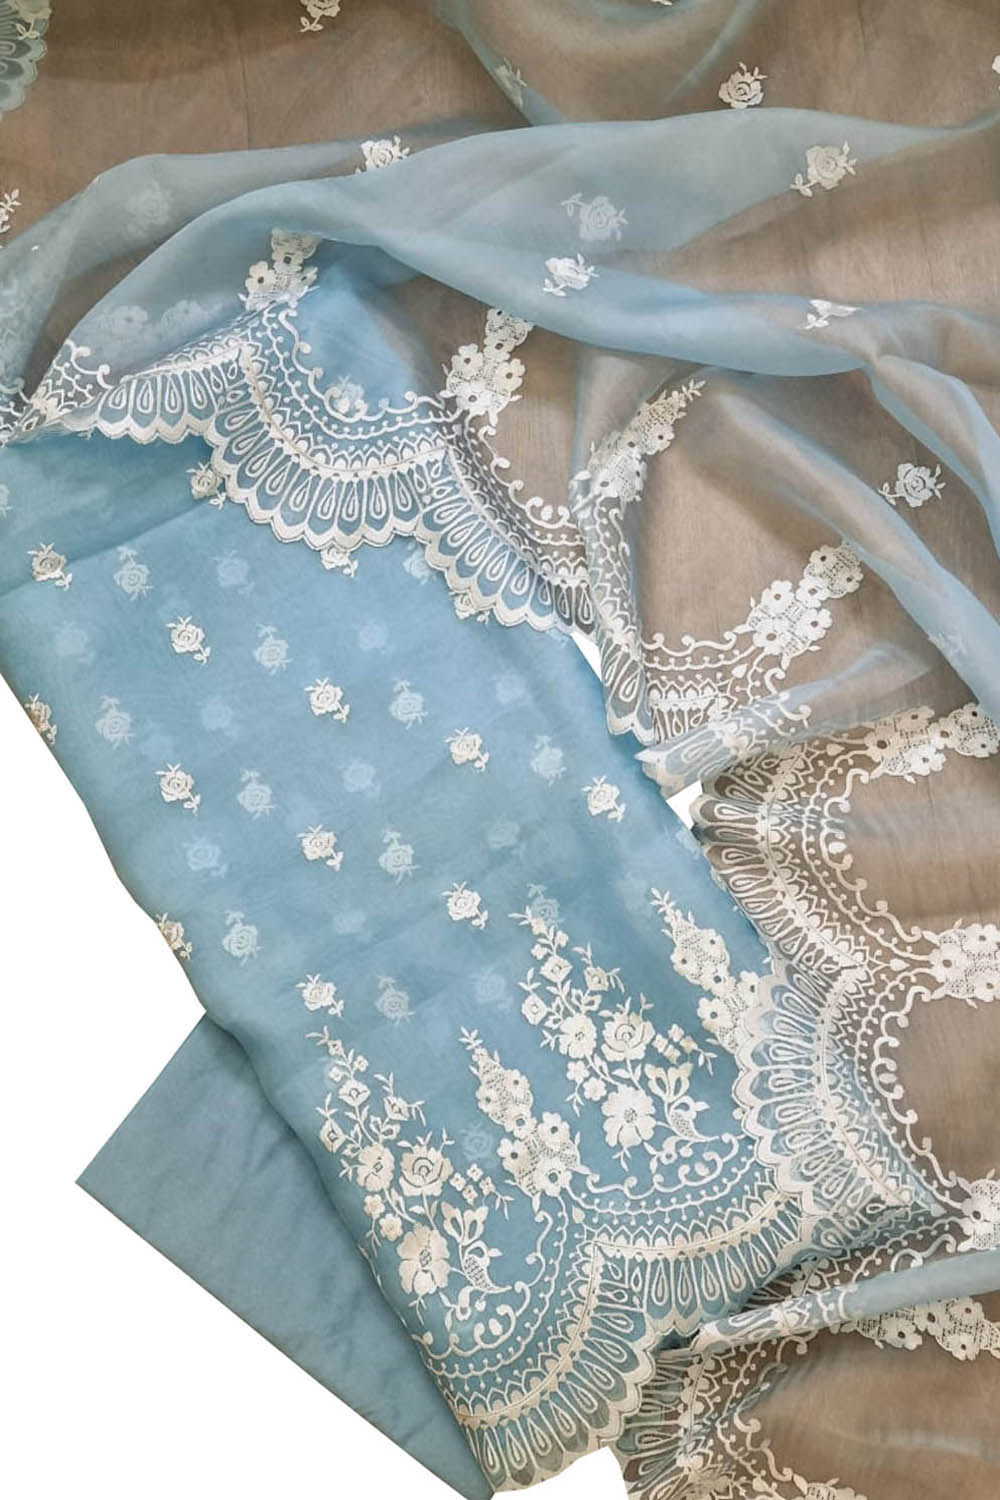 Stunning Blue Banarasi Organza Suit with Embroidery - 3 Piece Unstitched Set